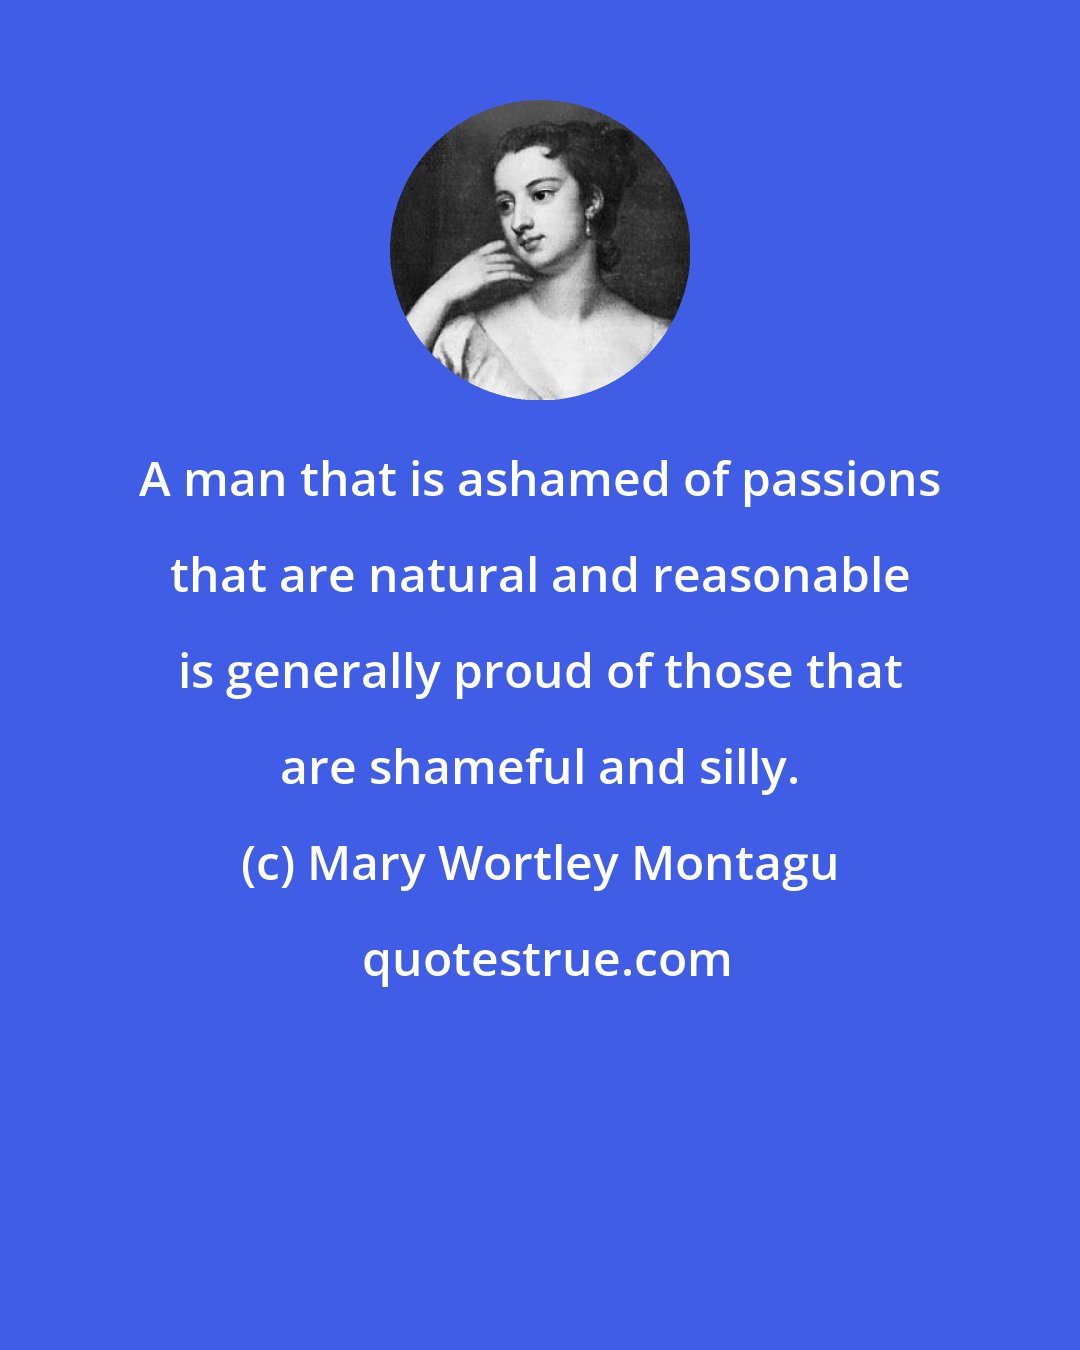 Mary Wortley Montagu: A man that is ashamed of passions that are natural and reasonable is generally proud of those that are shameful and silly.